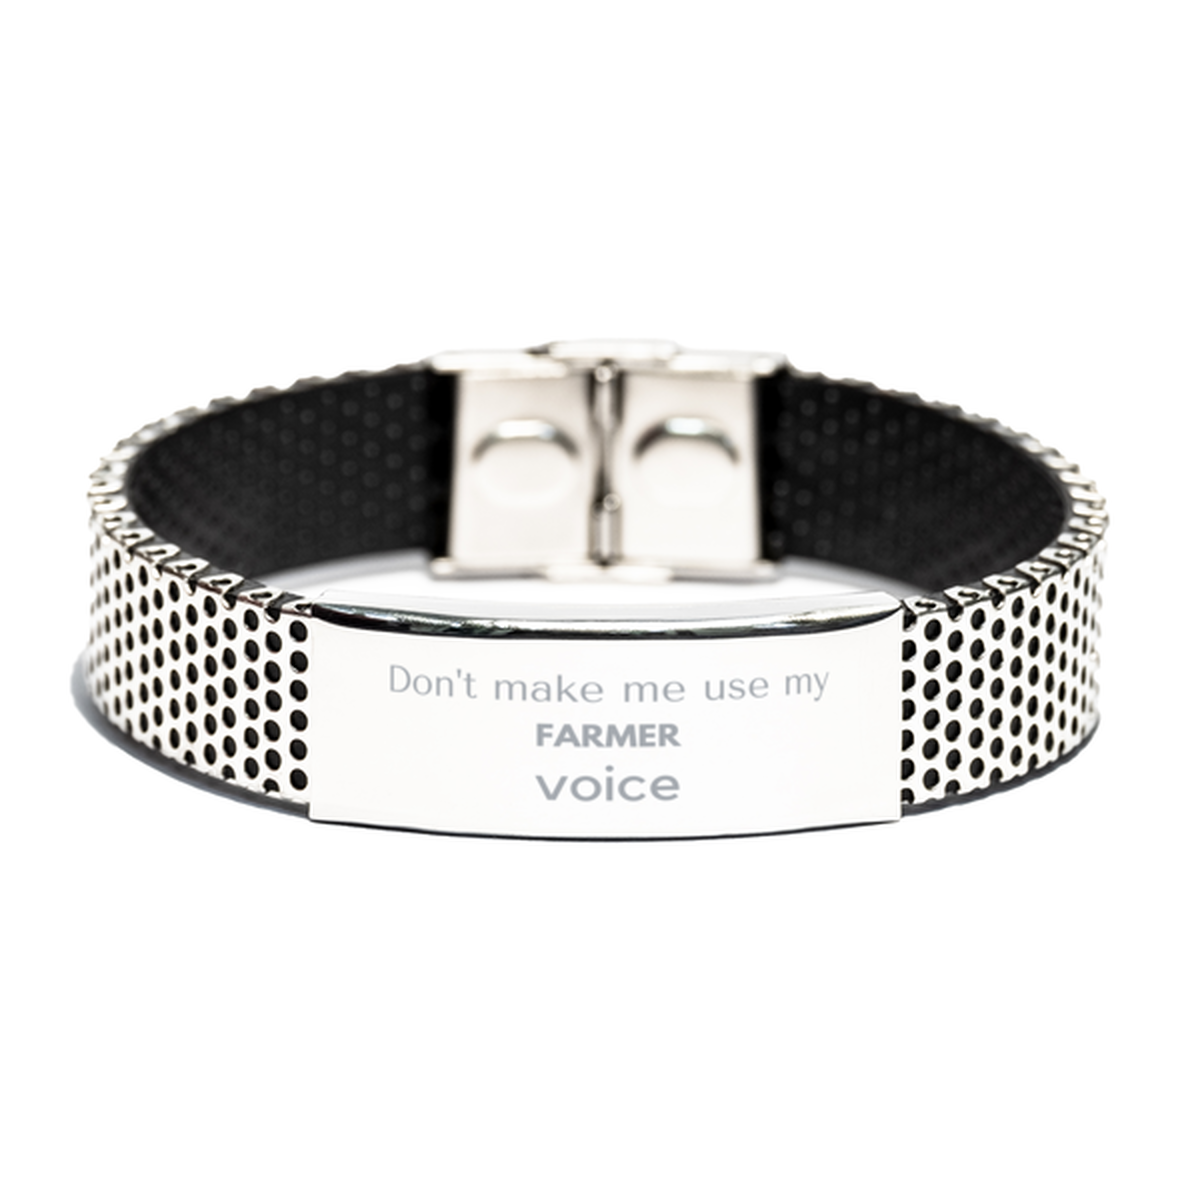 Don't make me use my Farmer voice, Sarcasm Farmer Gifts, Christmas Farmer Stainless Steel Bracelet Birthday Unique Gifts For Farmer Coworkers, Men, Women, Colleague, Friends